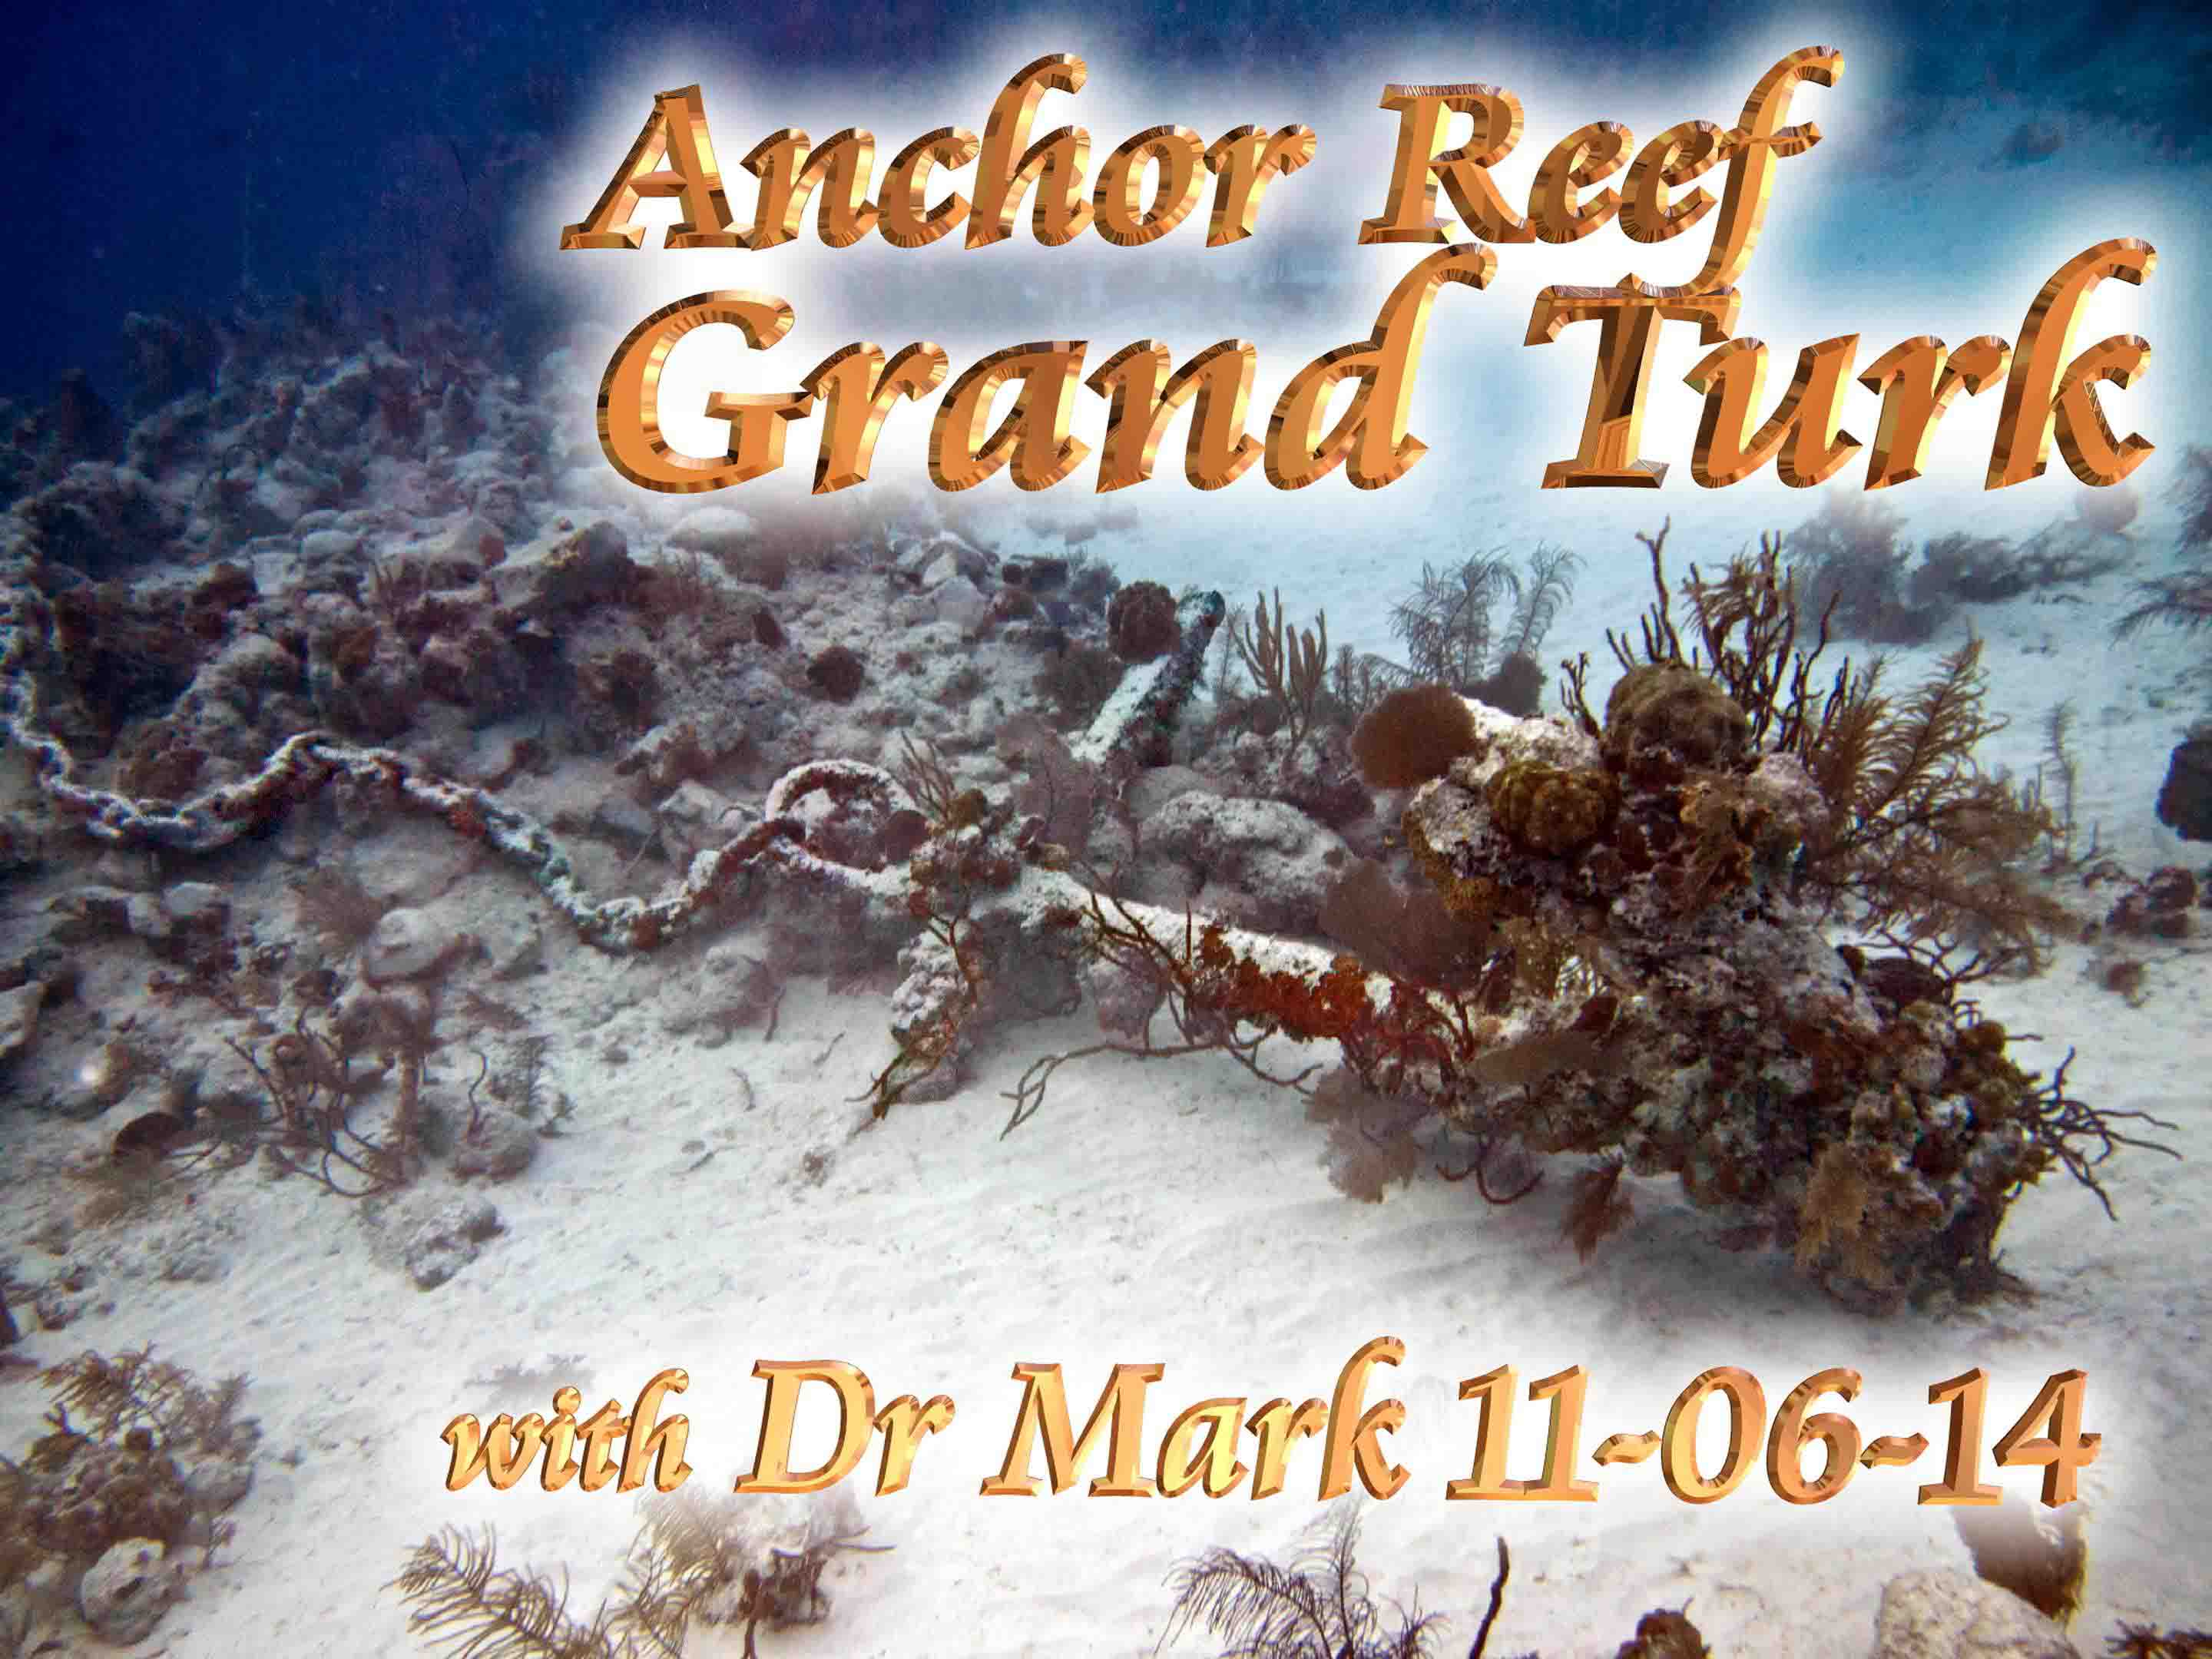 Anchor Reed Grand Turk 11-06-14